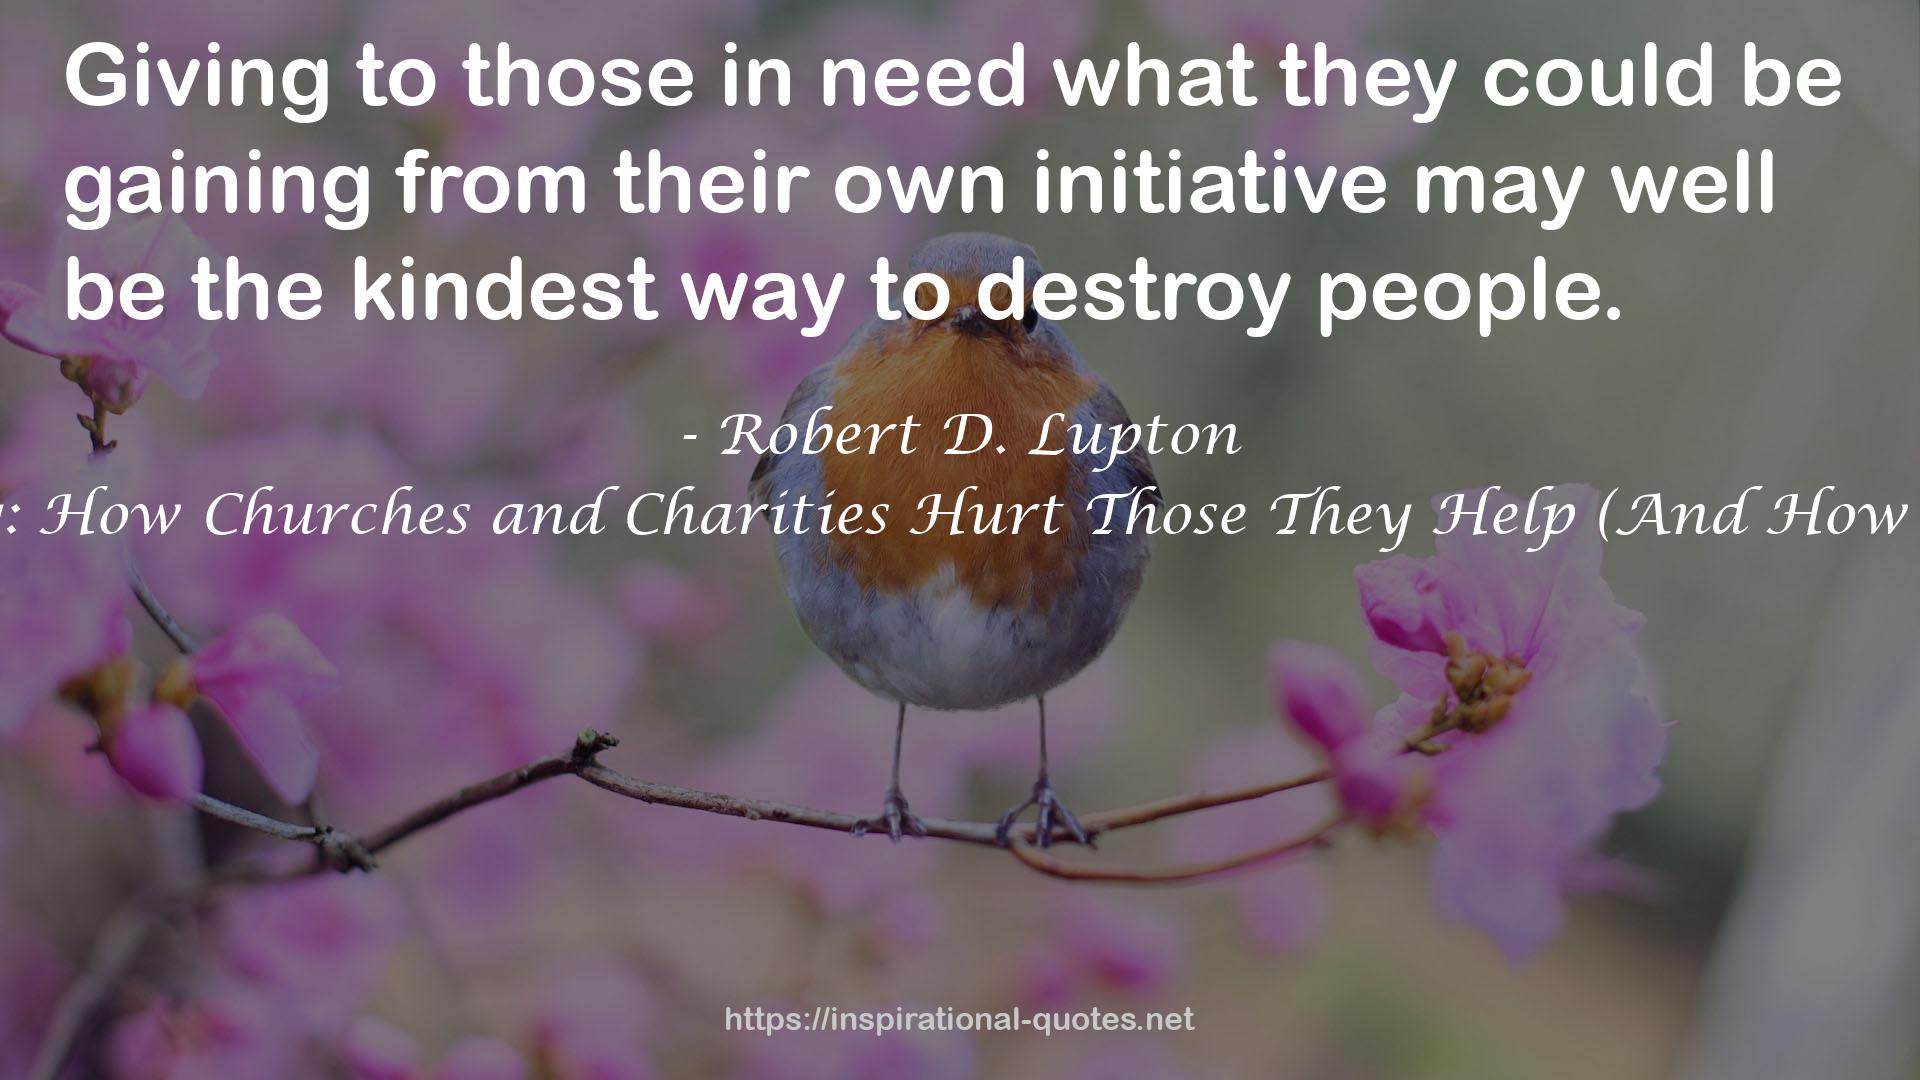 Toxic Charity: How Churches and Charities Hurt Those They Help (And How to Reverse It) QUOTES